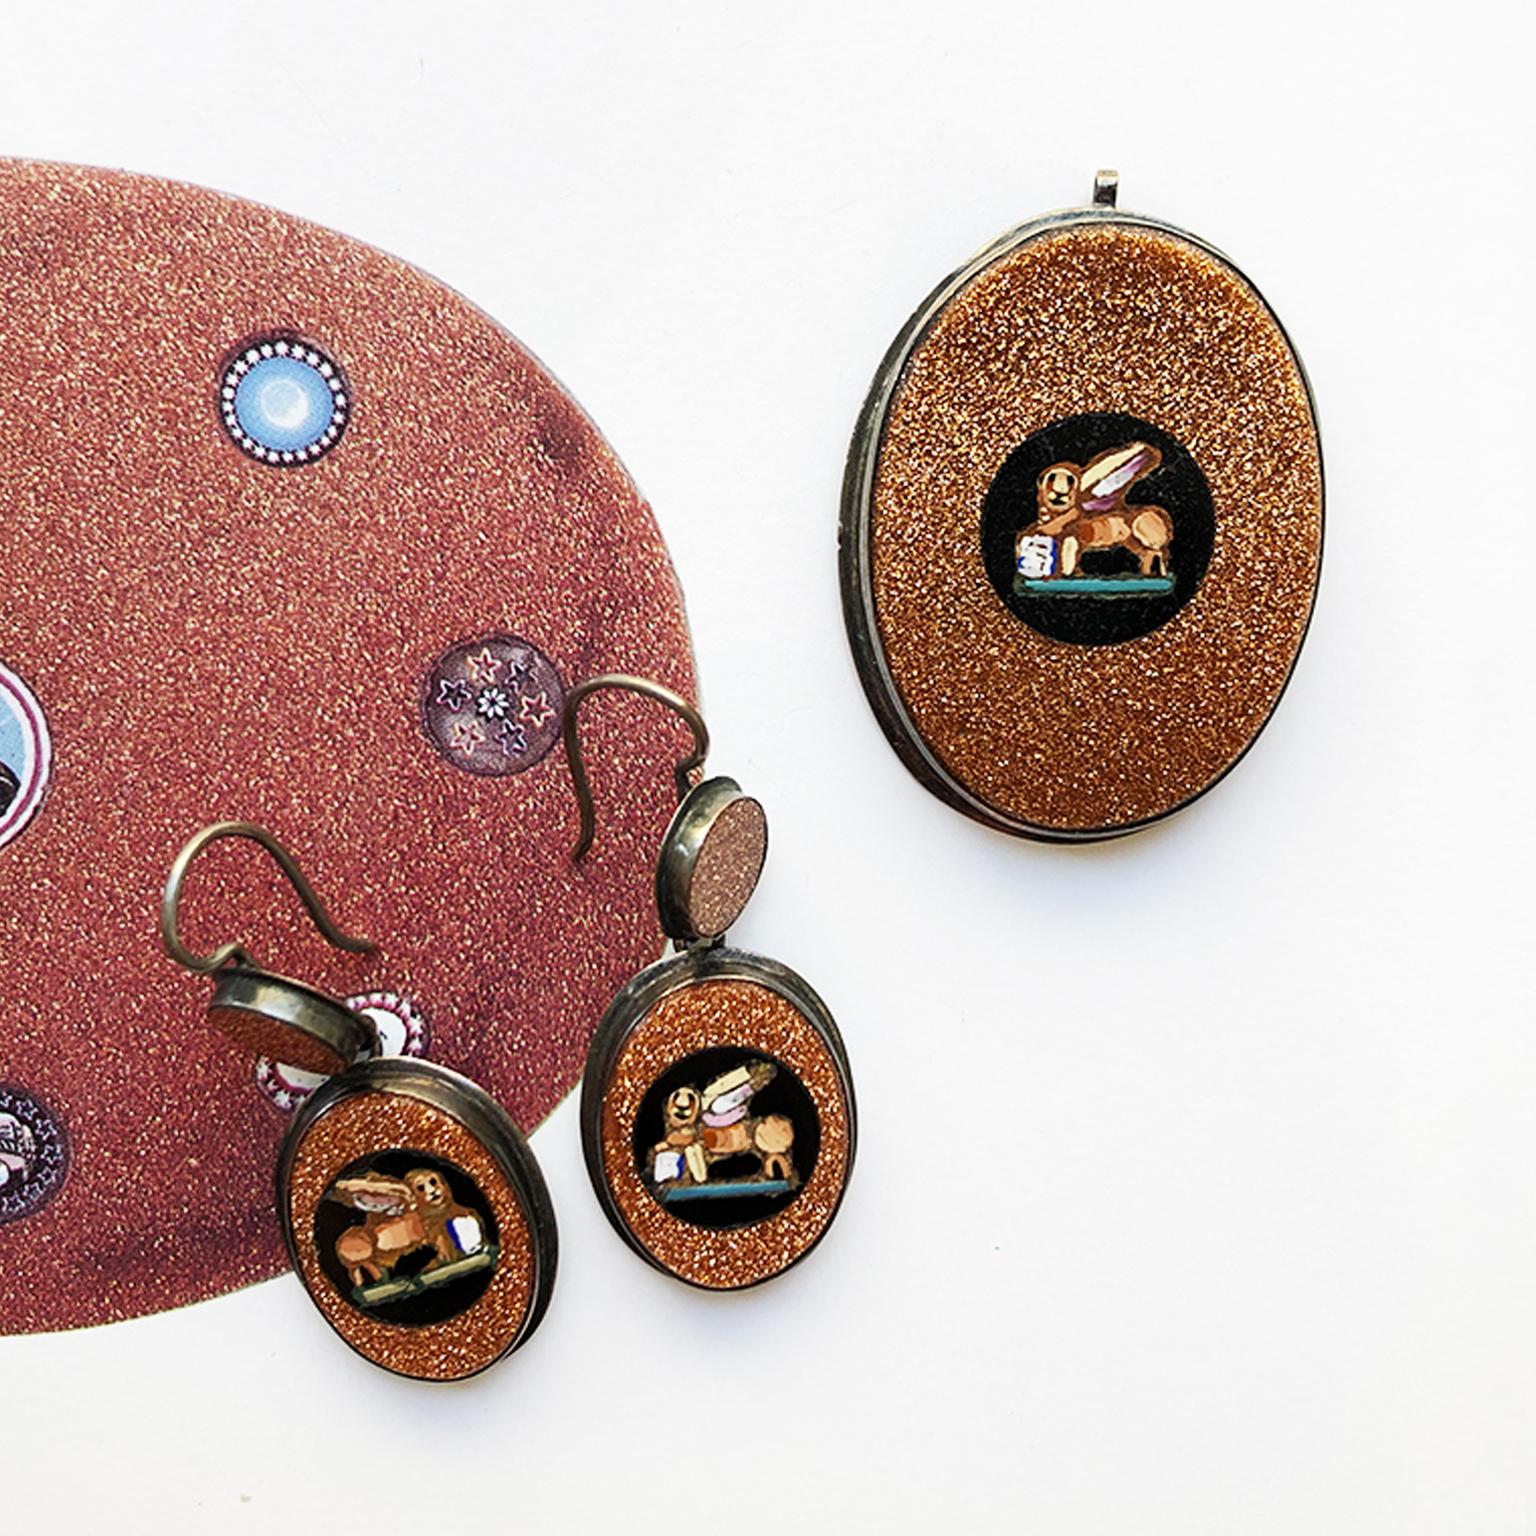 A set consisting of a pair of earrings and a pendant made of a glass micro-mosaic lion on a circular black background.

Weight earrings: 3.79 grams
Dimensions earrings: 3.6 x 1.6 cm
Weight pendant: 5.71 grams
Dimensions pendant: 3.6 x 2.6